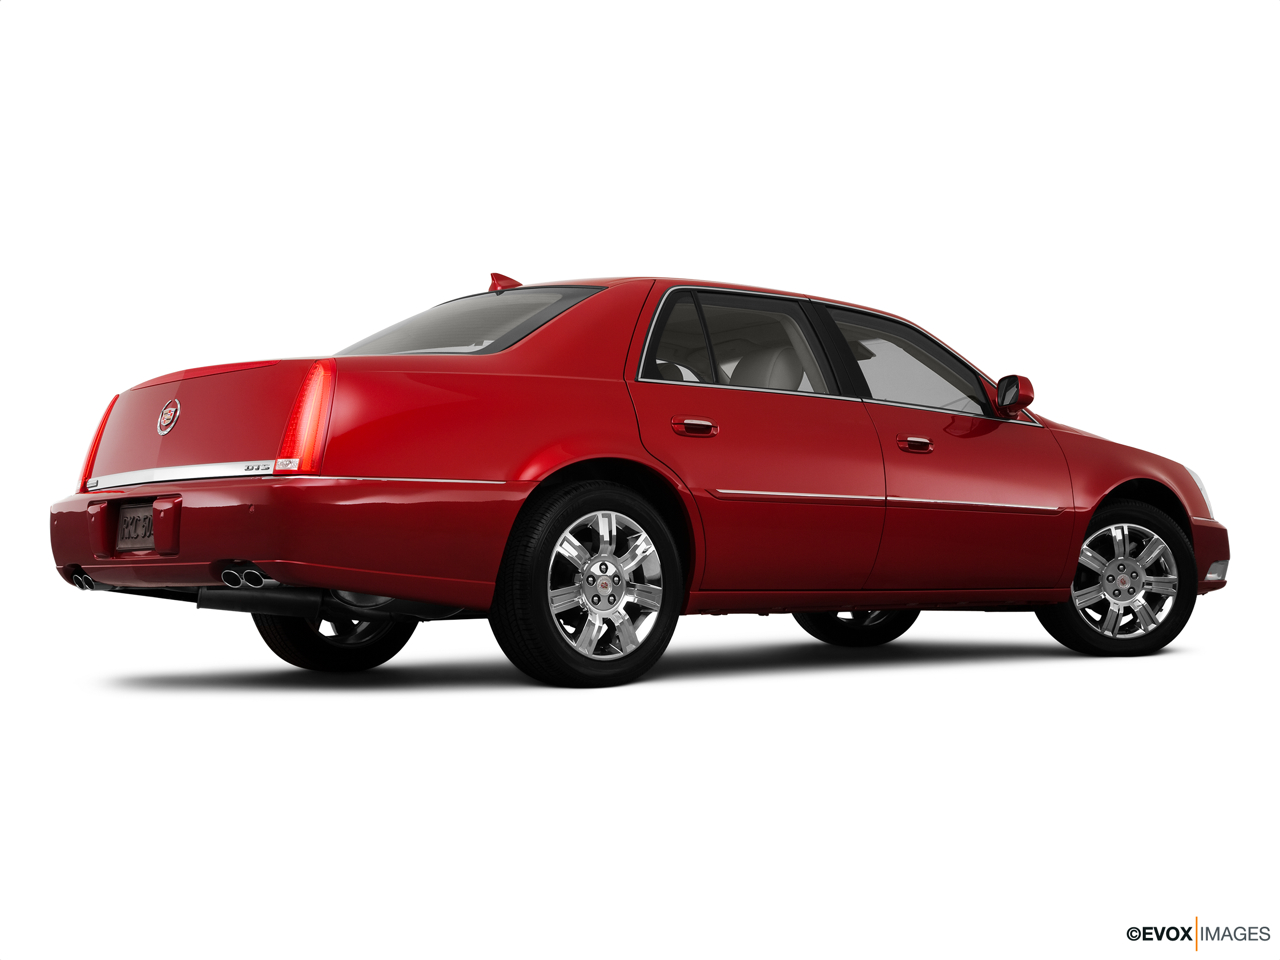 2011 Cadillac DTS Platinum Low/wide rear 5/8. 